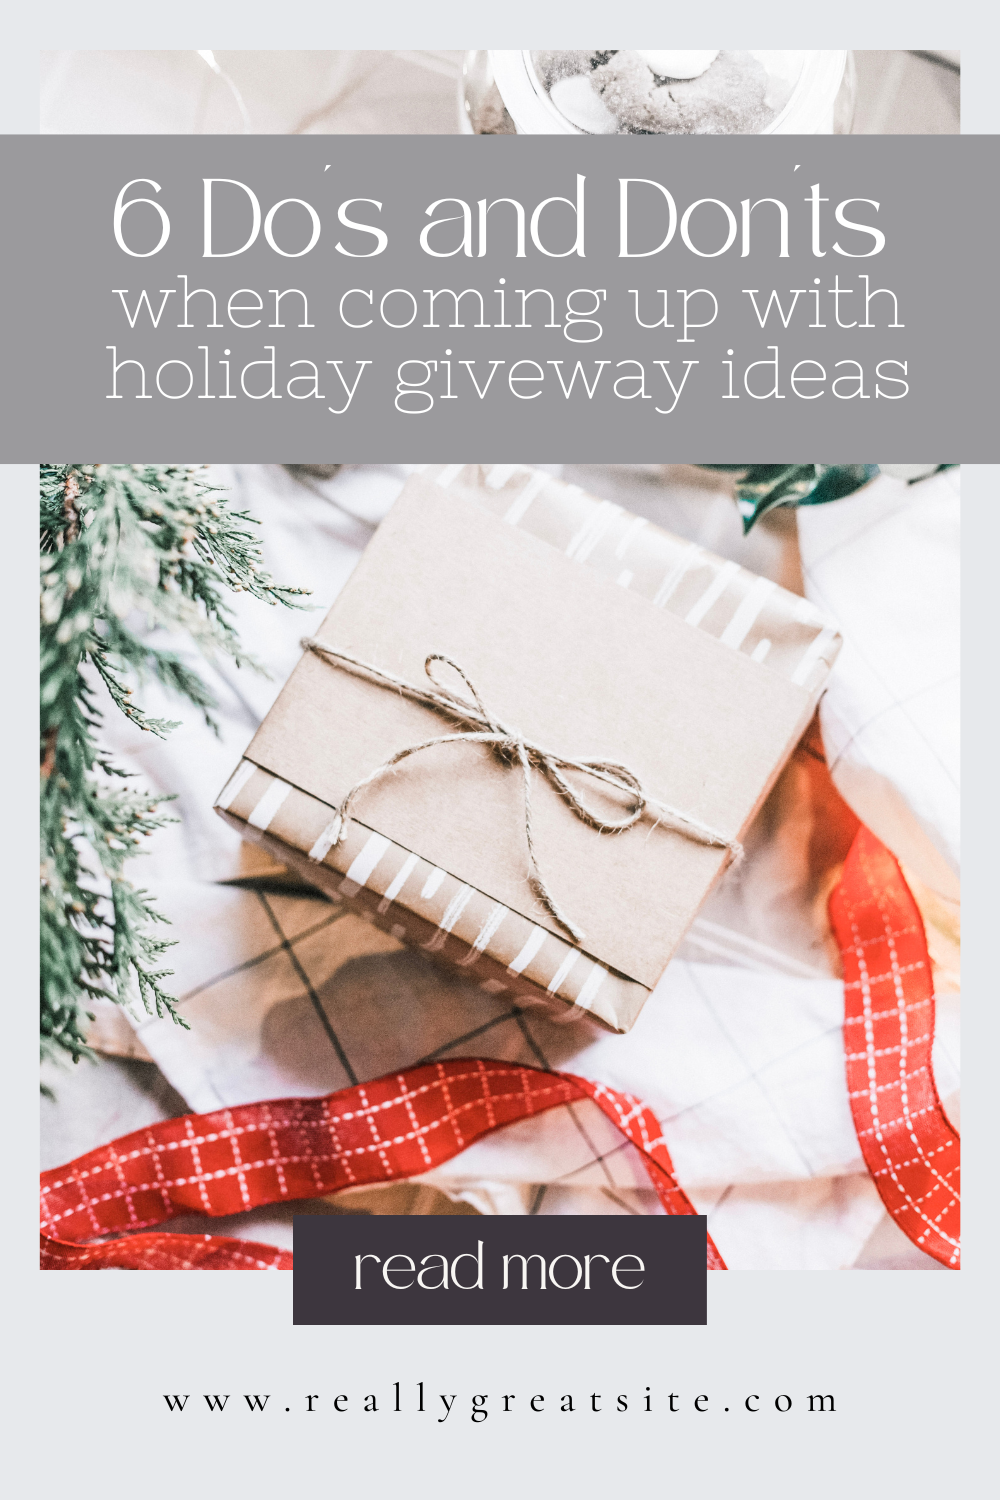 A gift is wrapped with sustainable materials and surrounded by wrapping materials. This article covers the do's and don'ts when coming up with Holiday Giveaway Ideas.